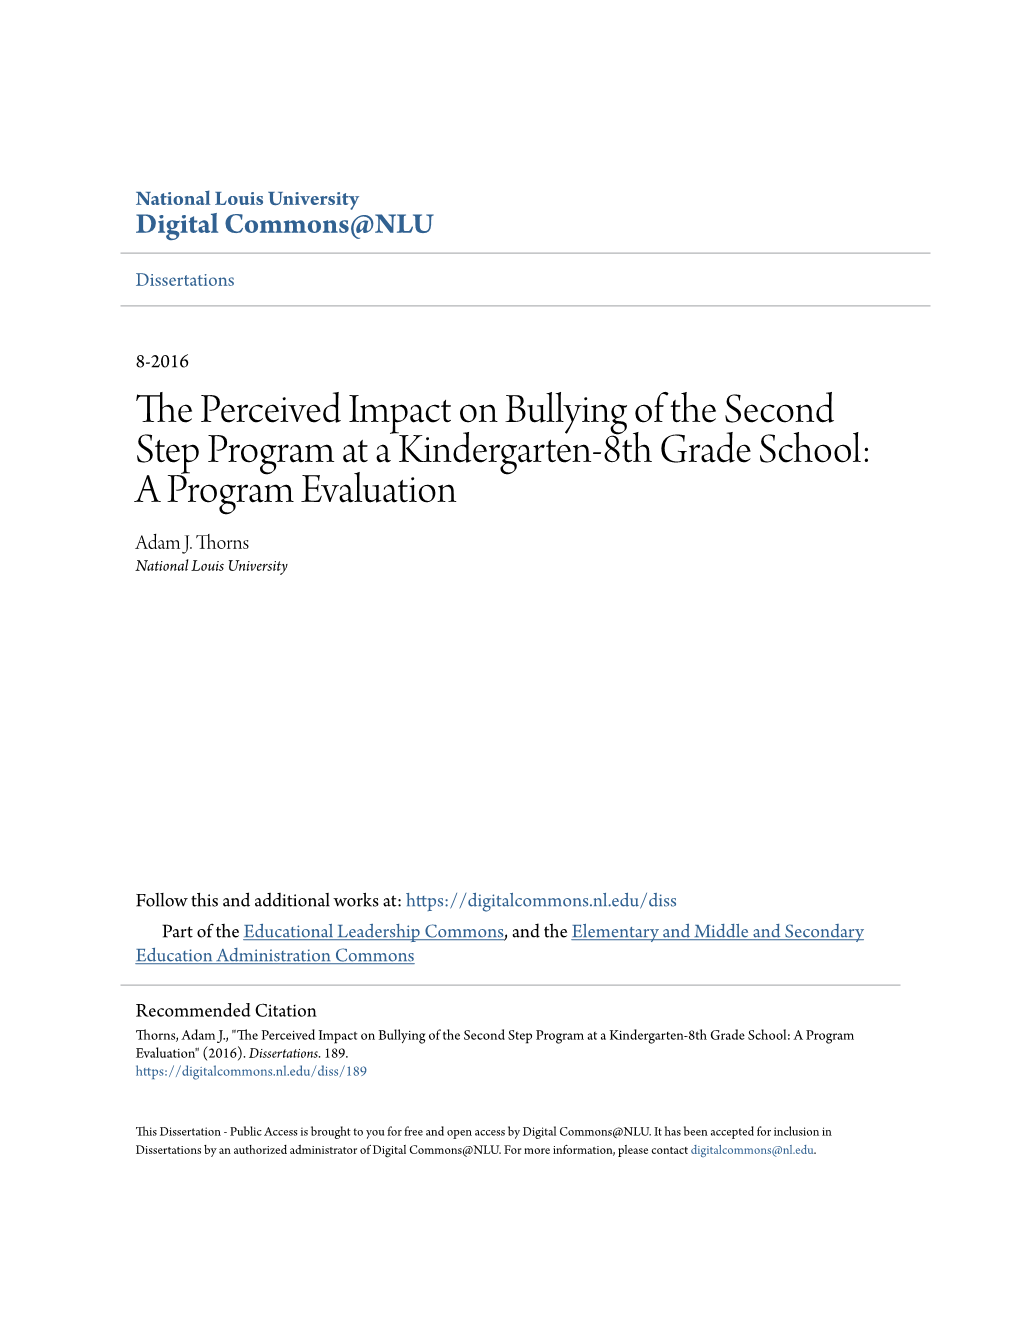 The Perceived Impact on Bullying of the Second Step Program at a Kindergarten–8Th Grade School: a Program Evaluation